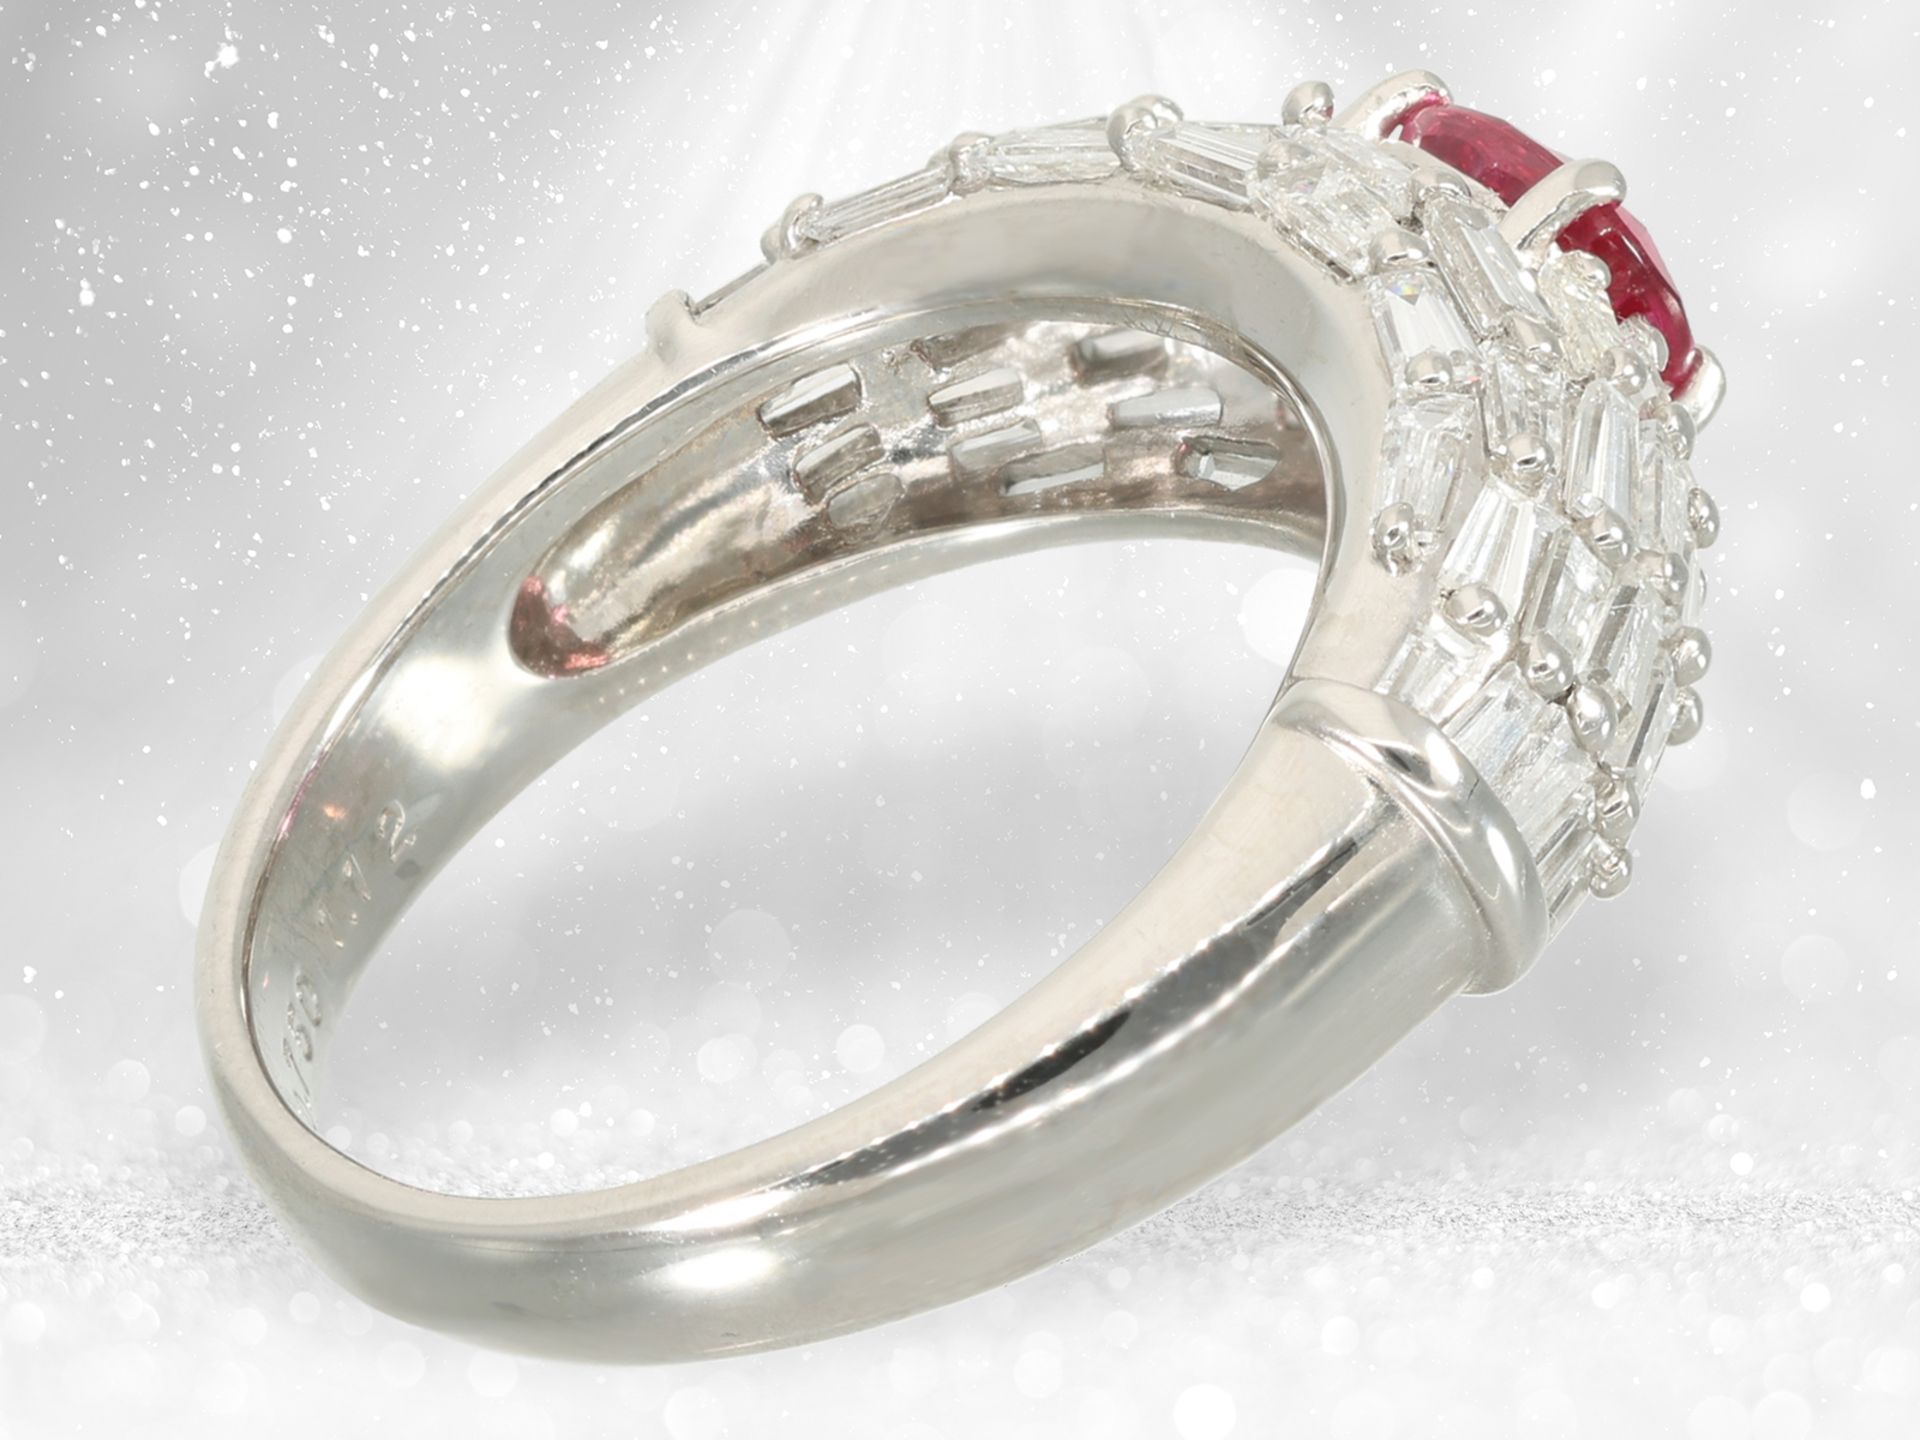 Ring: exceptional goldsmith's work in platinum, fine ruby/diamond setting "cocktail ring" - Image 4 of 4